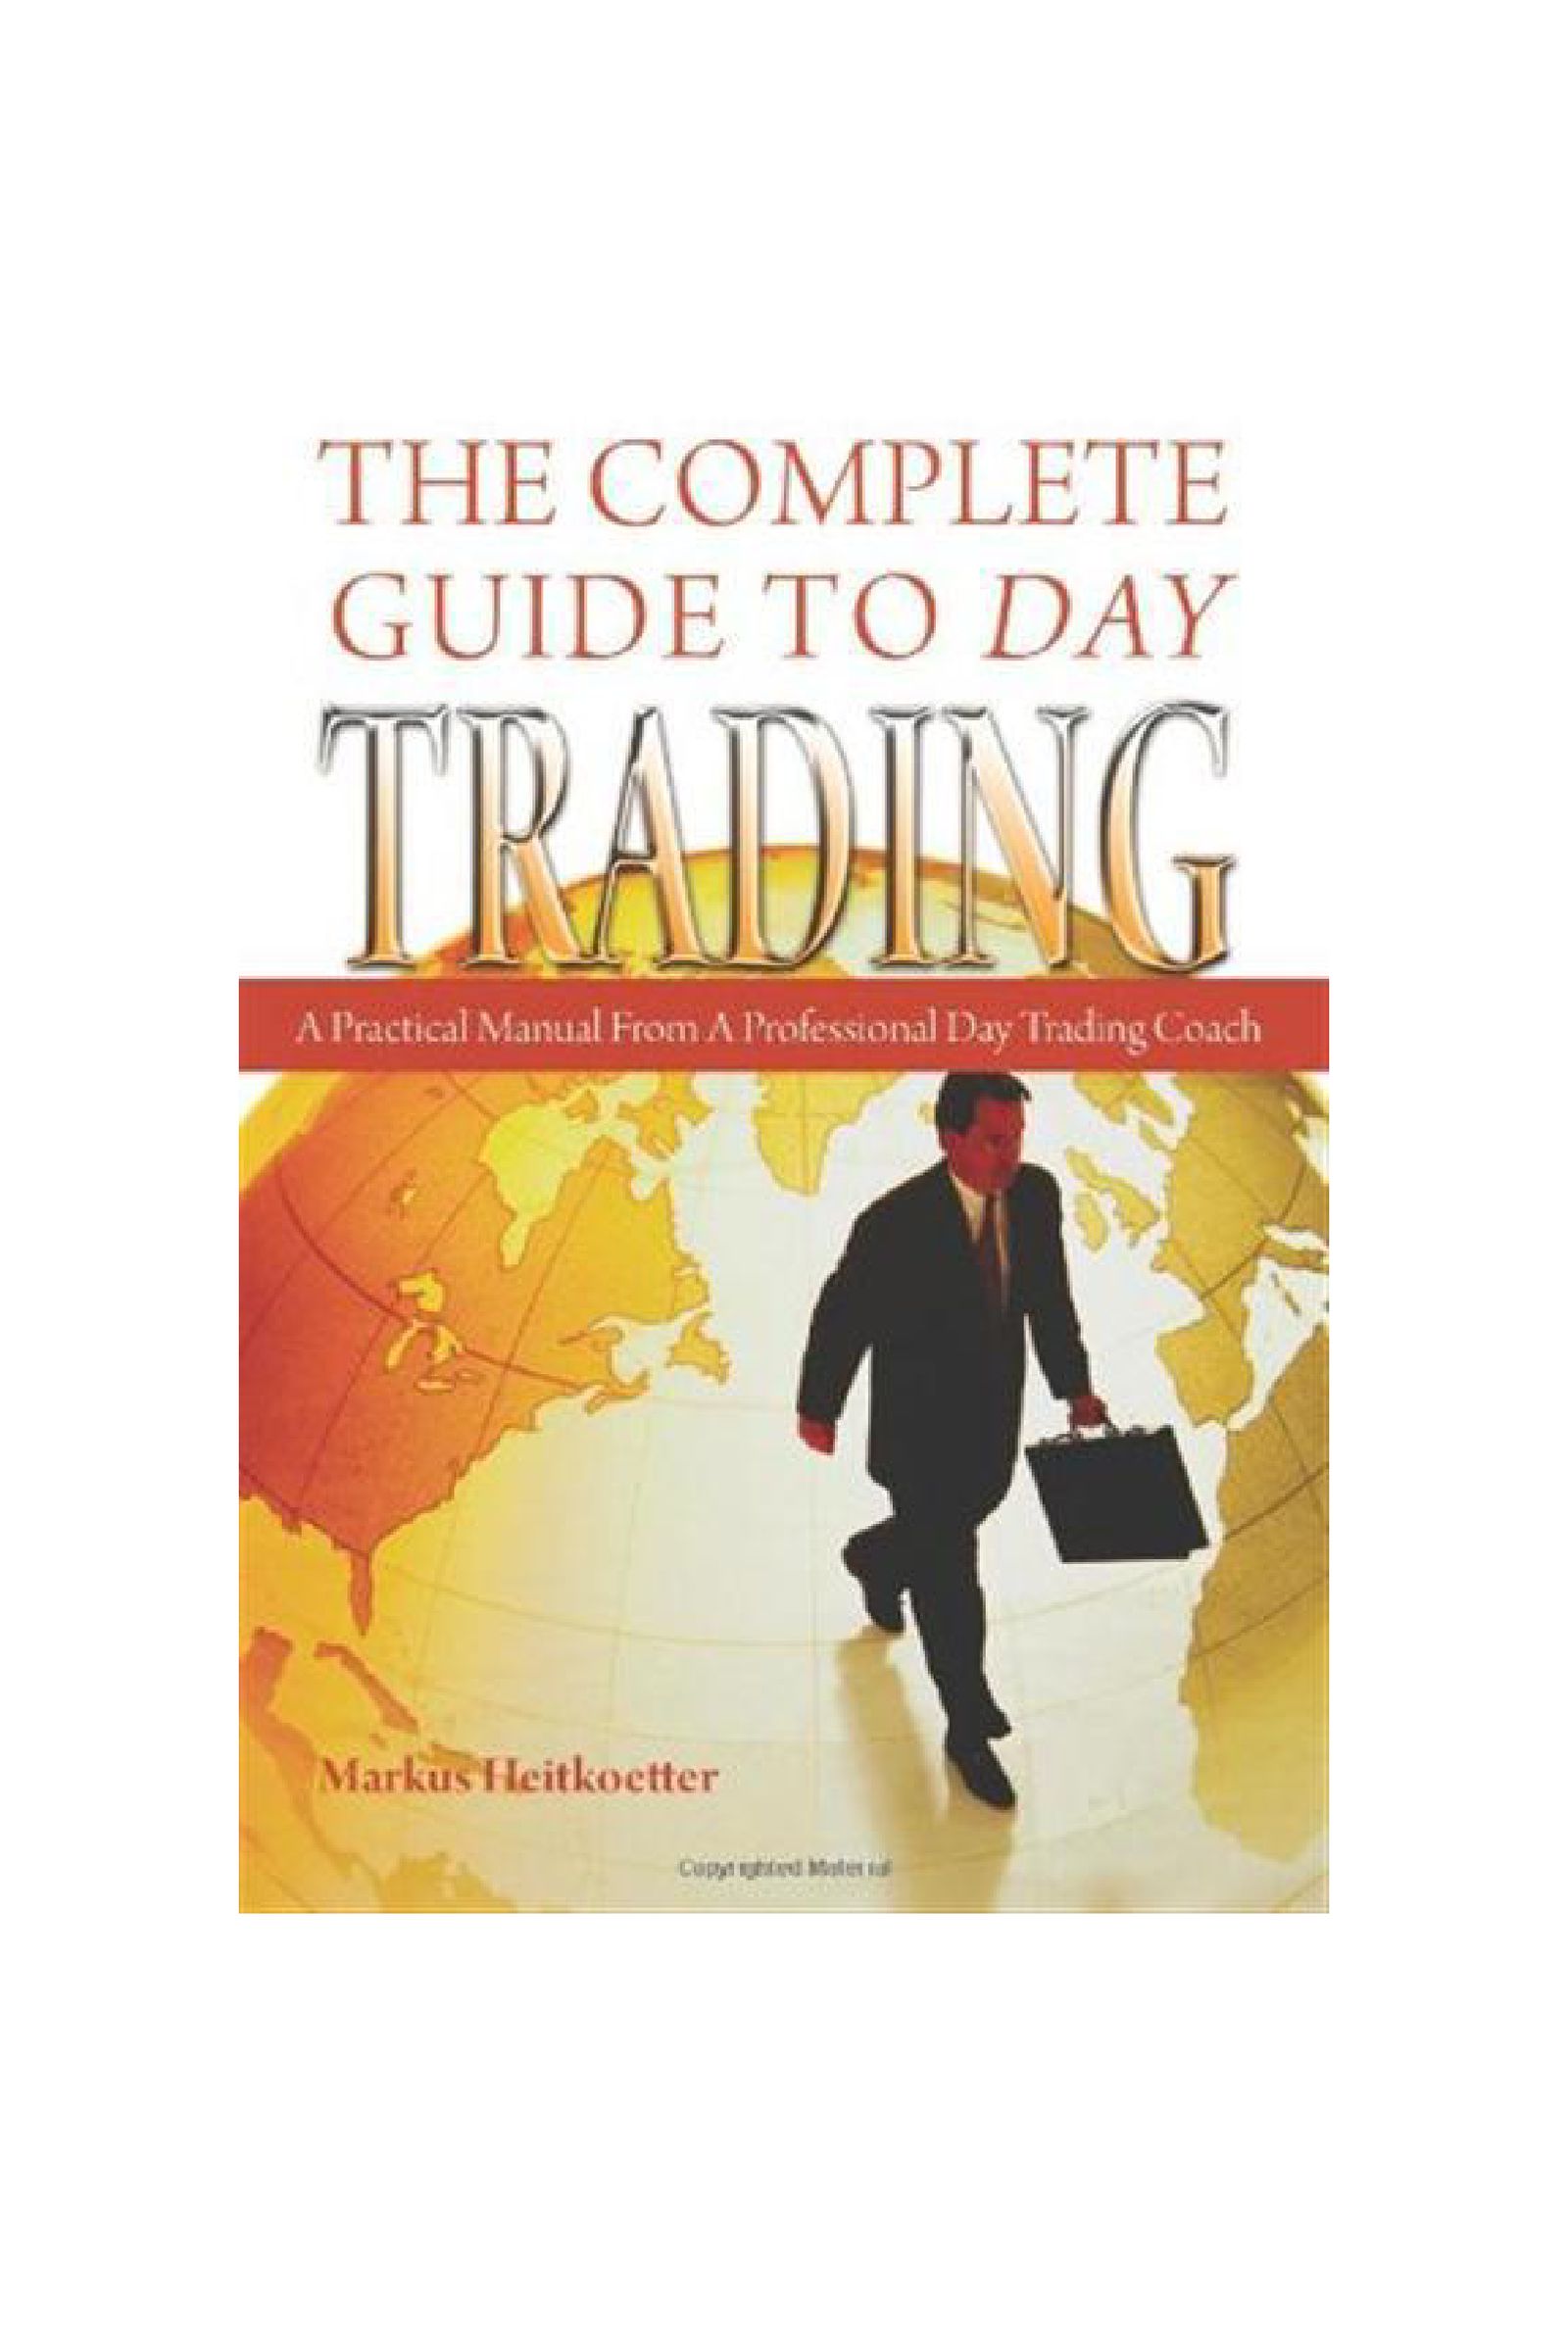 The Complete Guide To Day Trading PDF, eBook by Markus Heitkoetter 